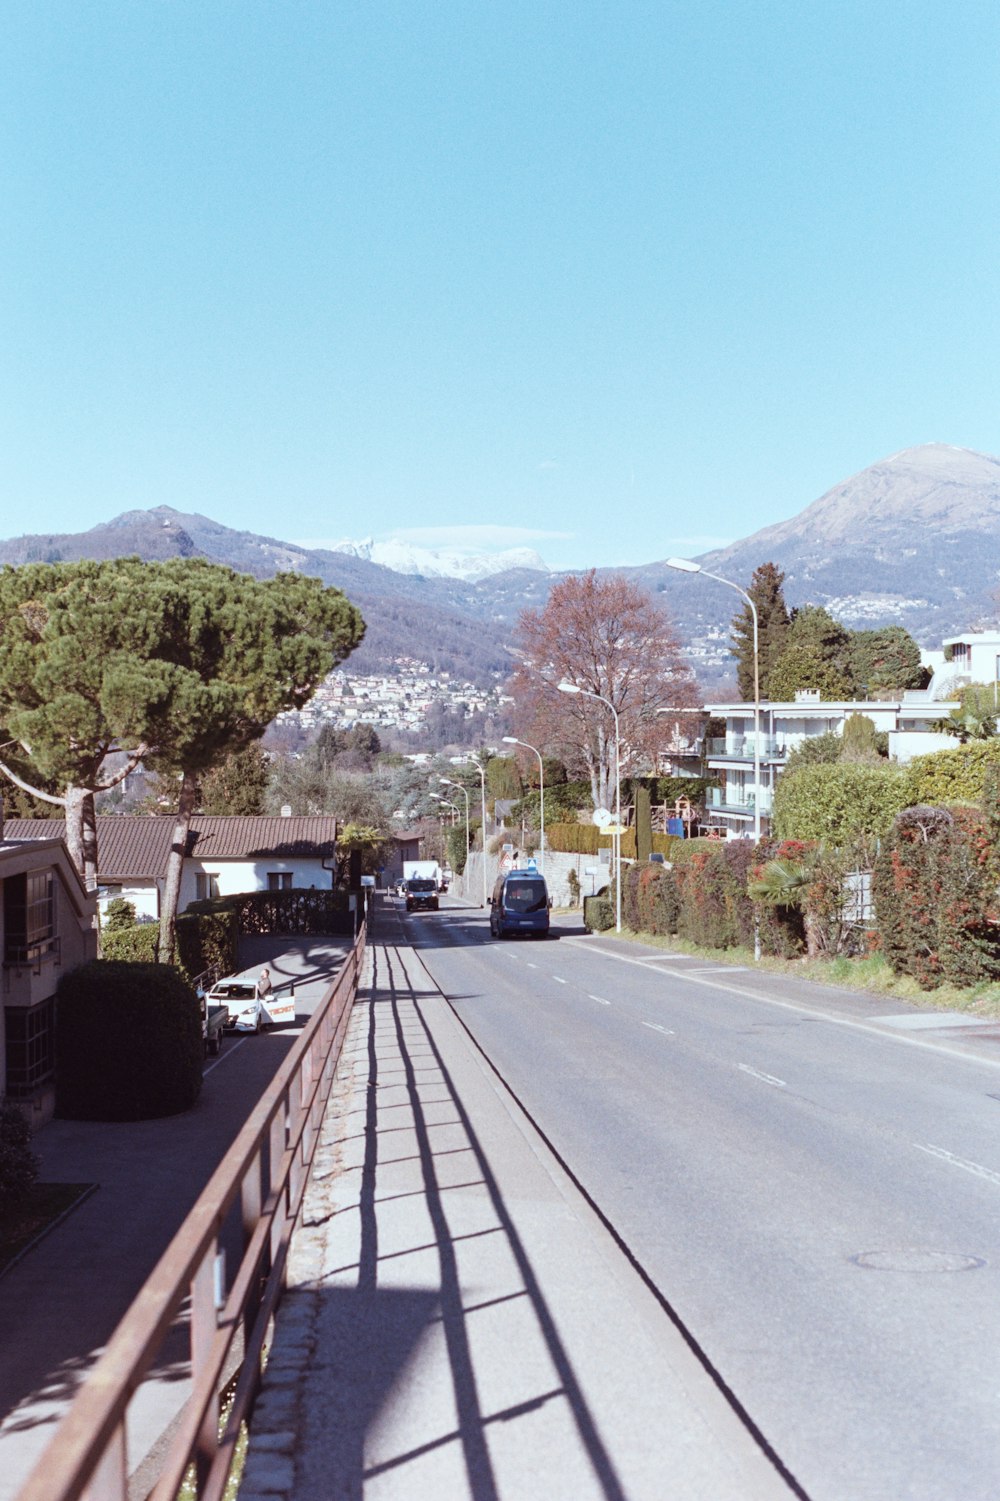 a view of a street with mountains in the background